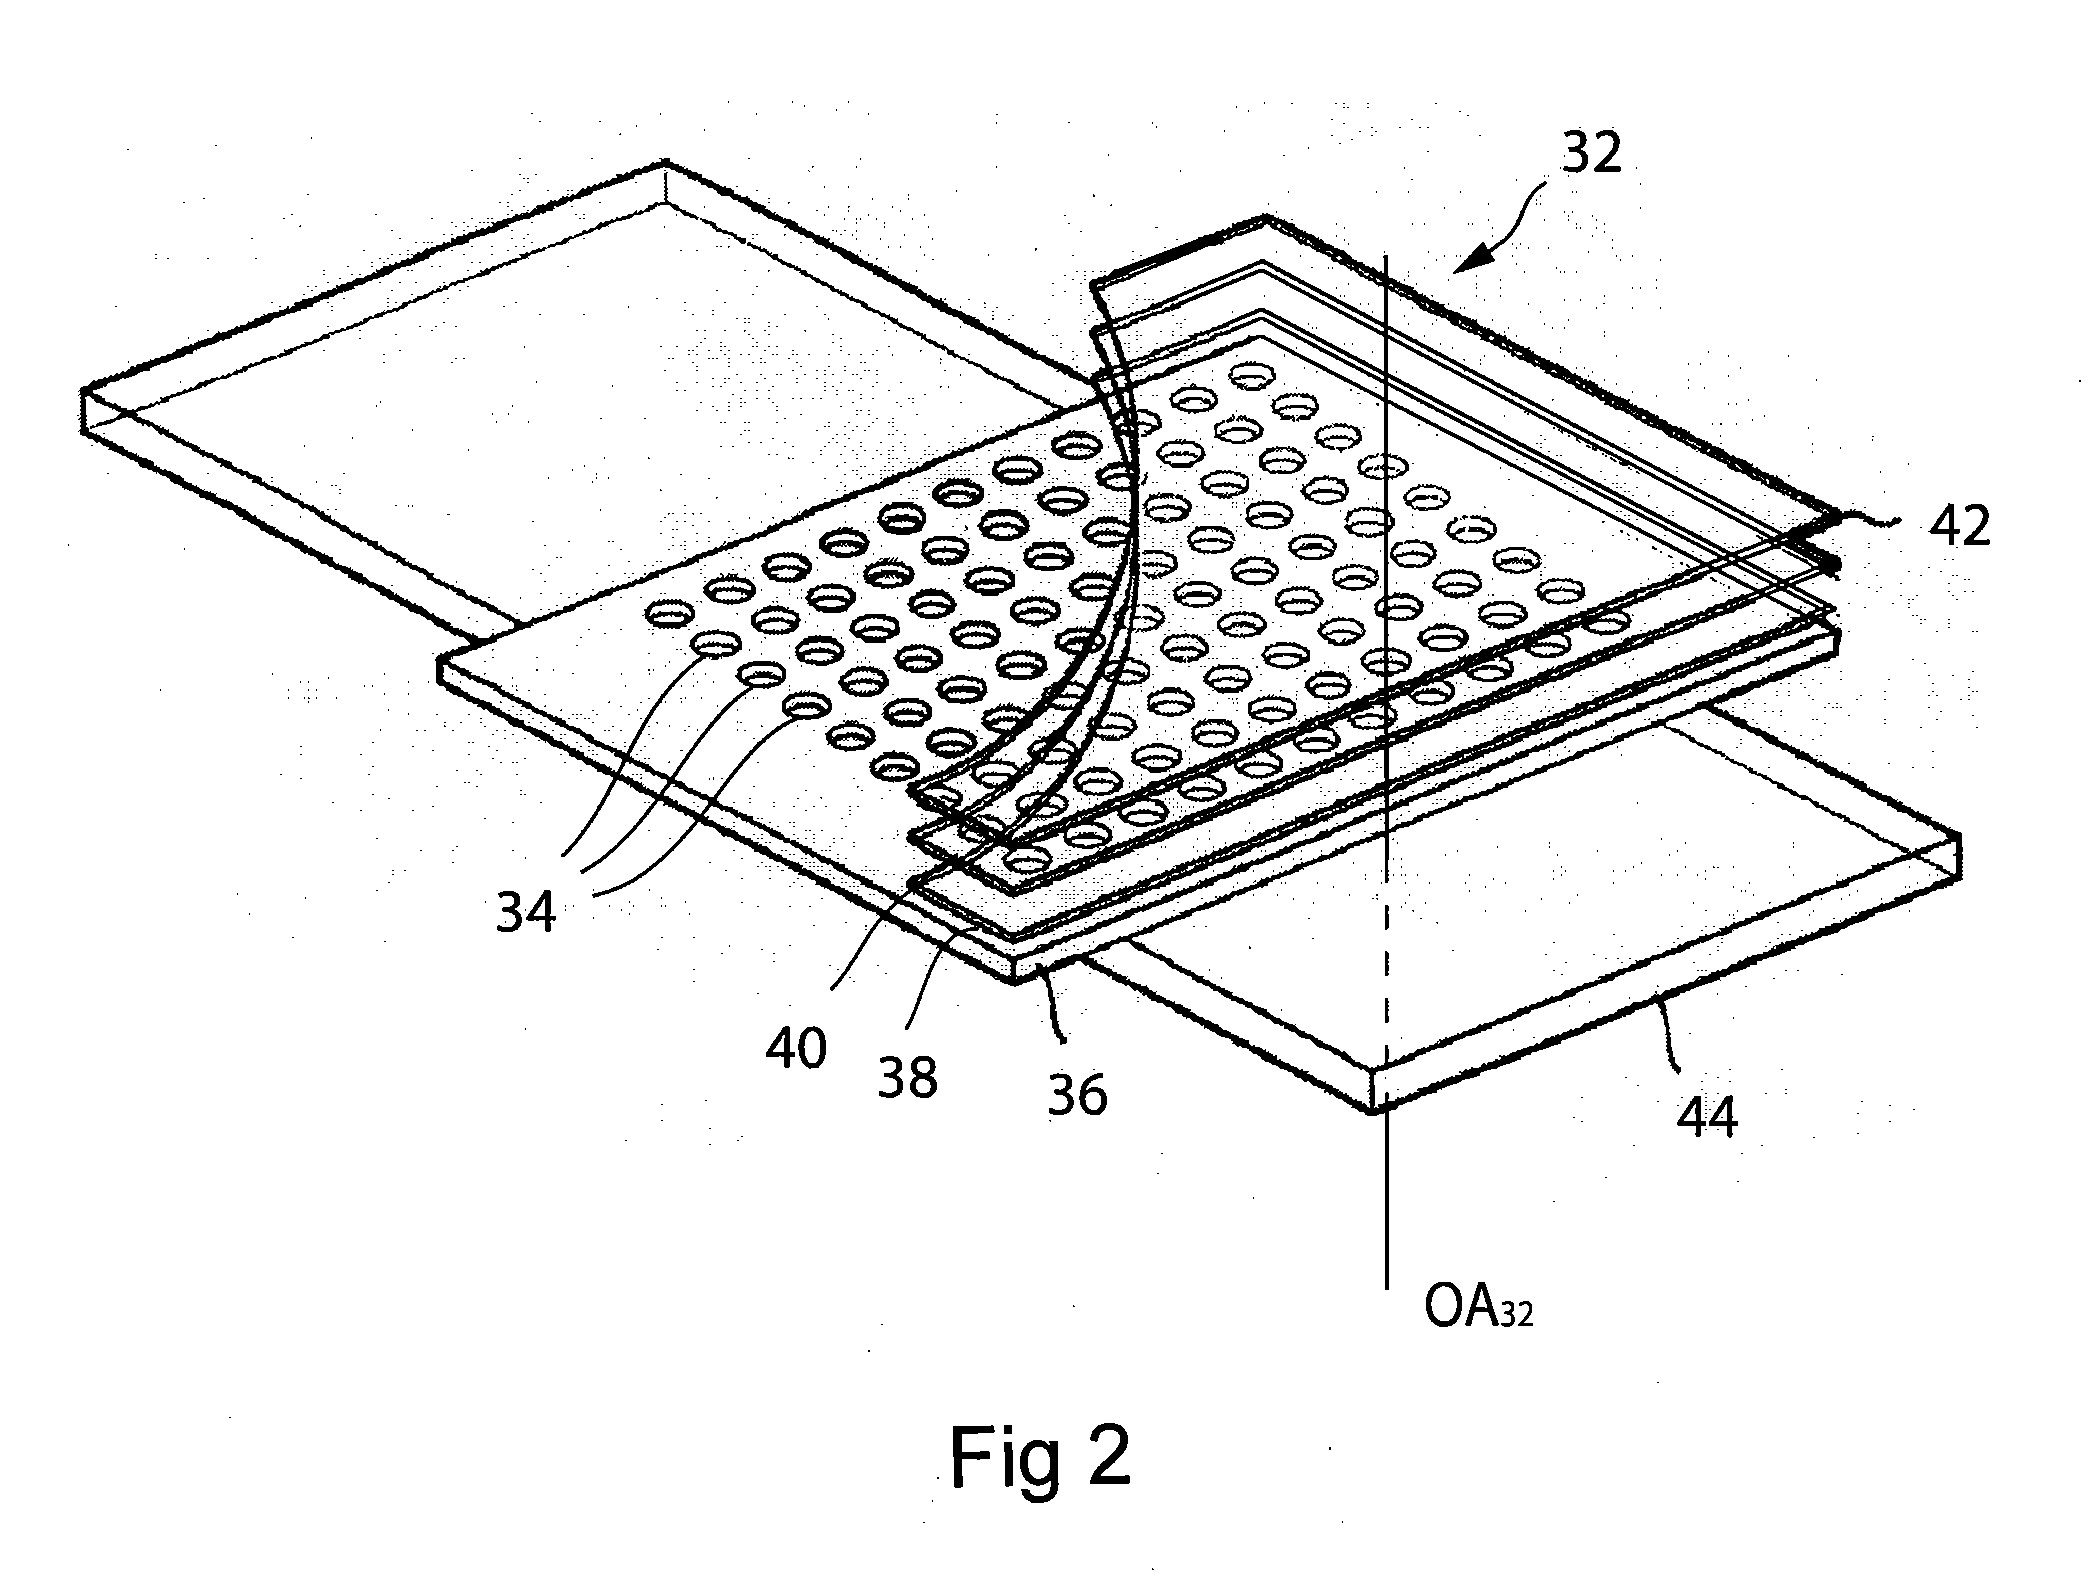 Single axis illumination for multi-axis imaging system